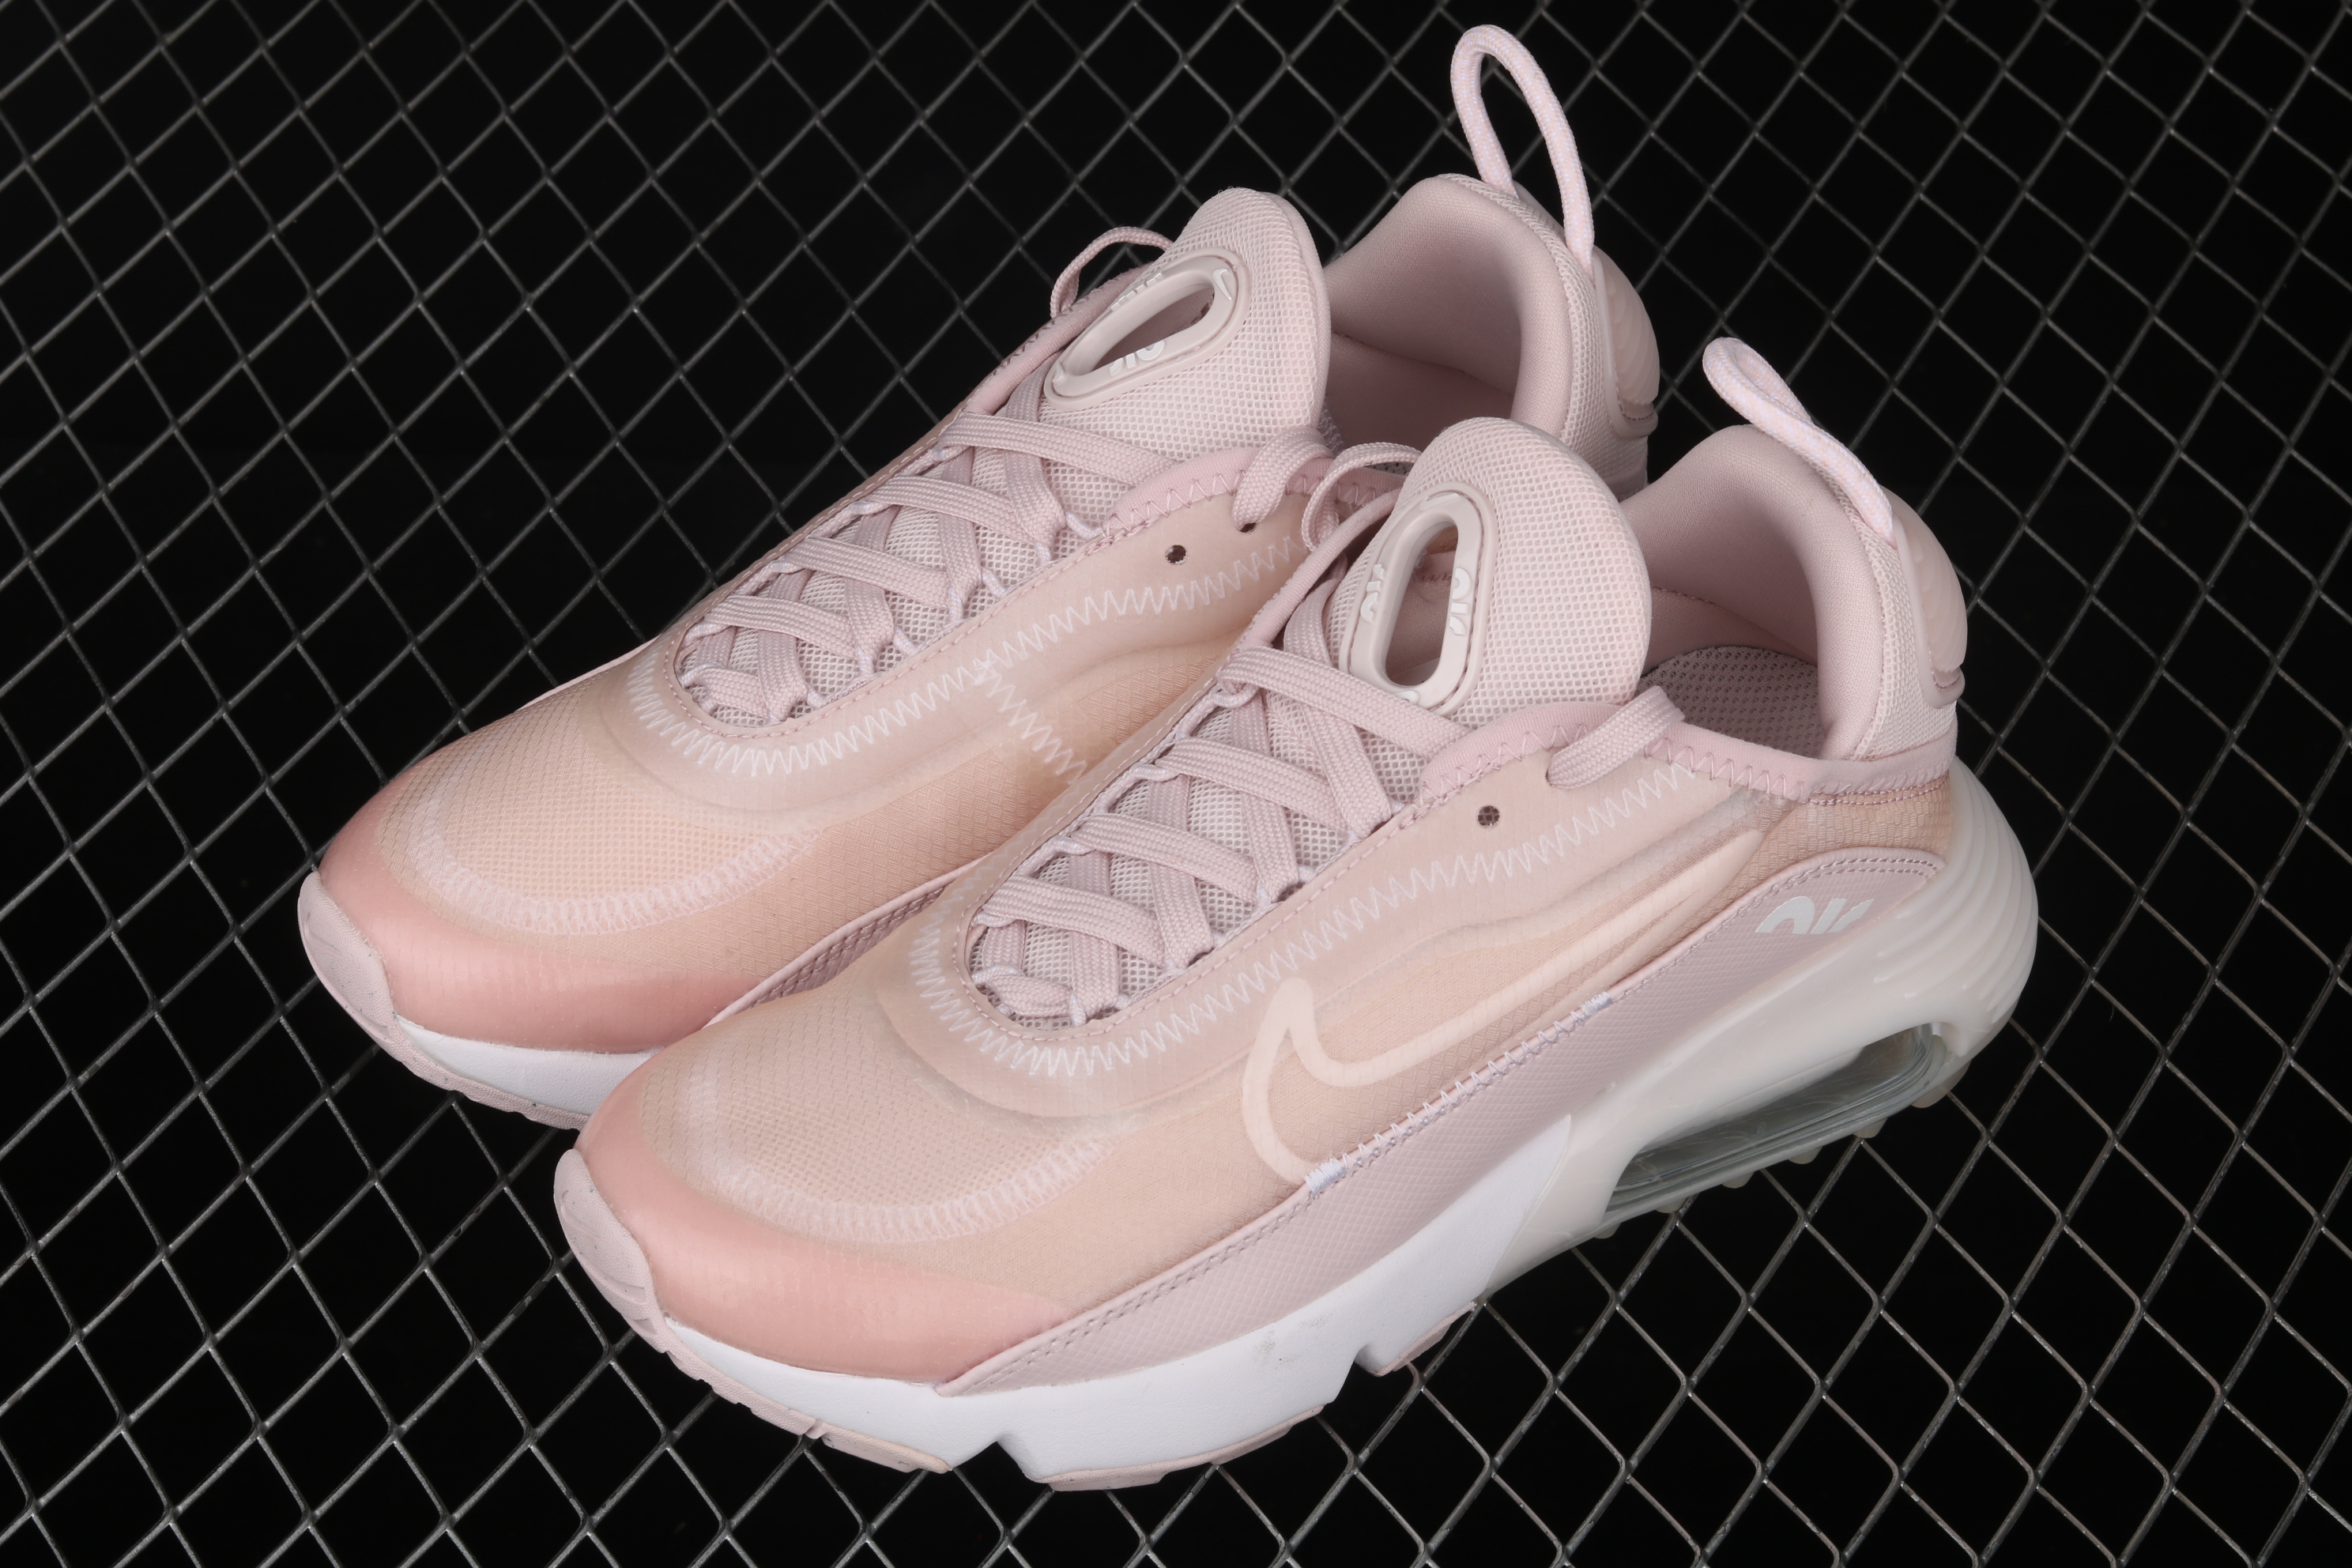 Nike Air Max 2090 Pink White Shoes